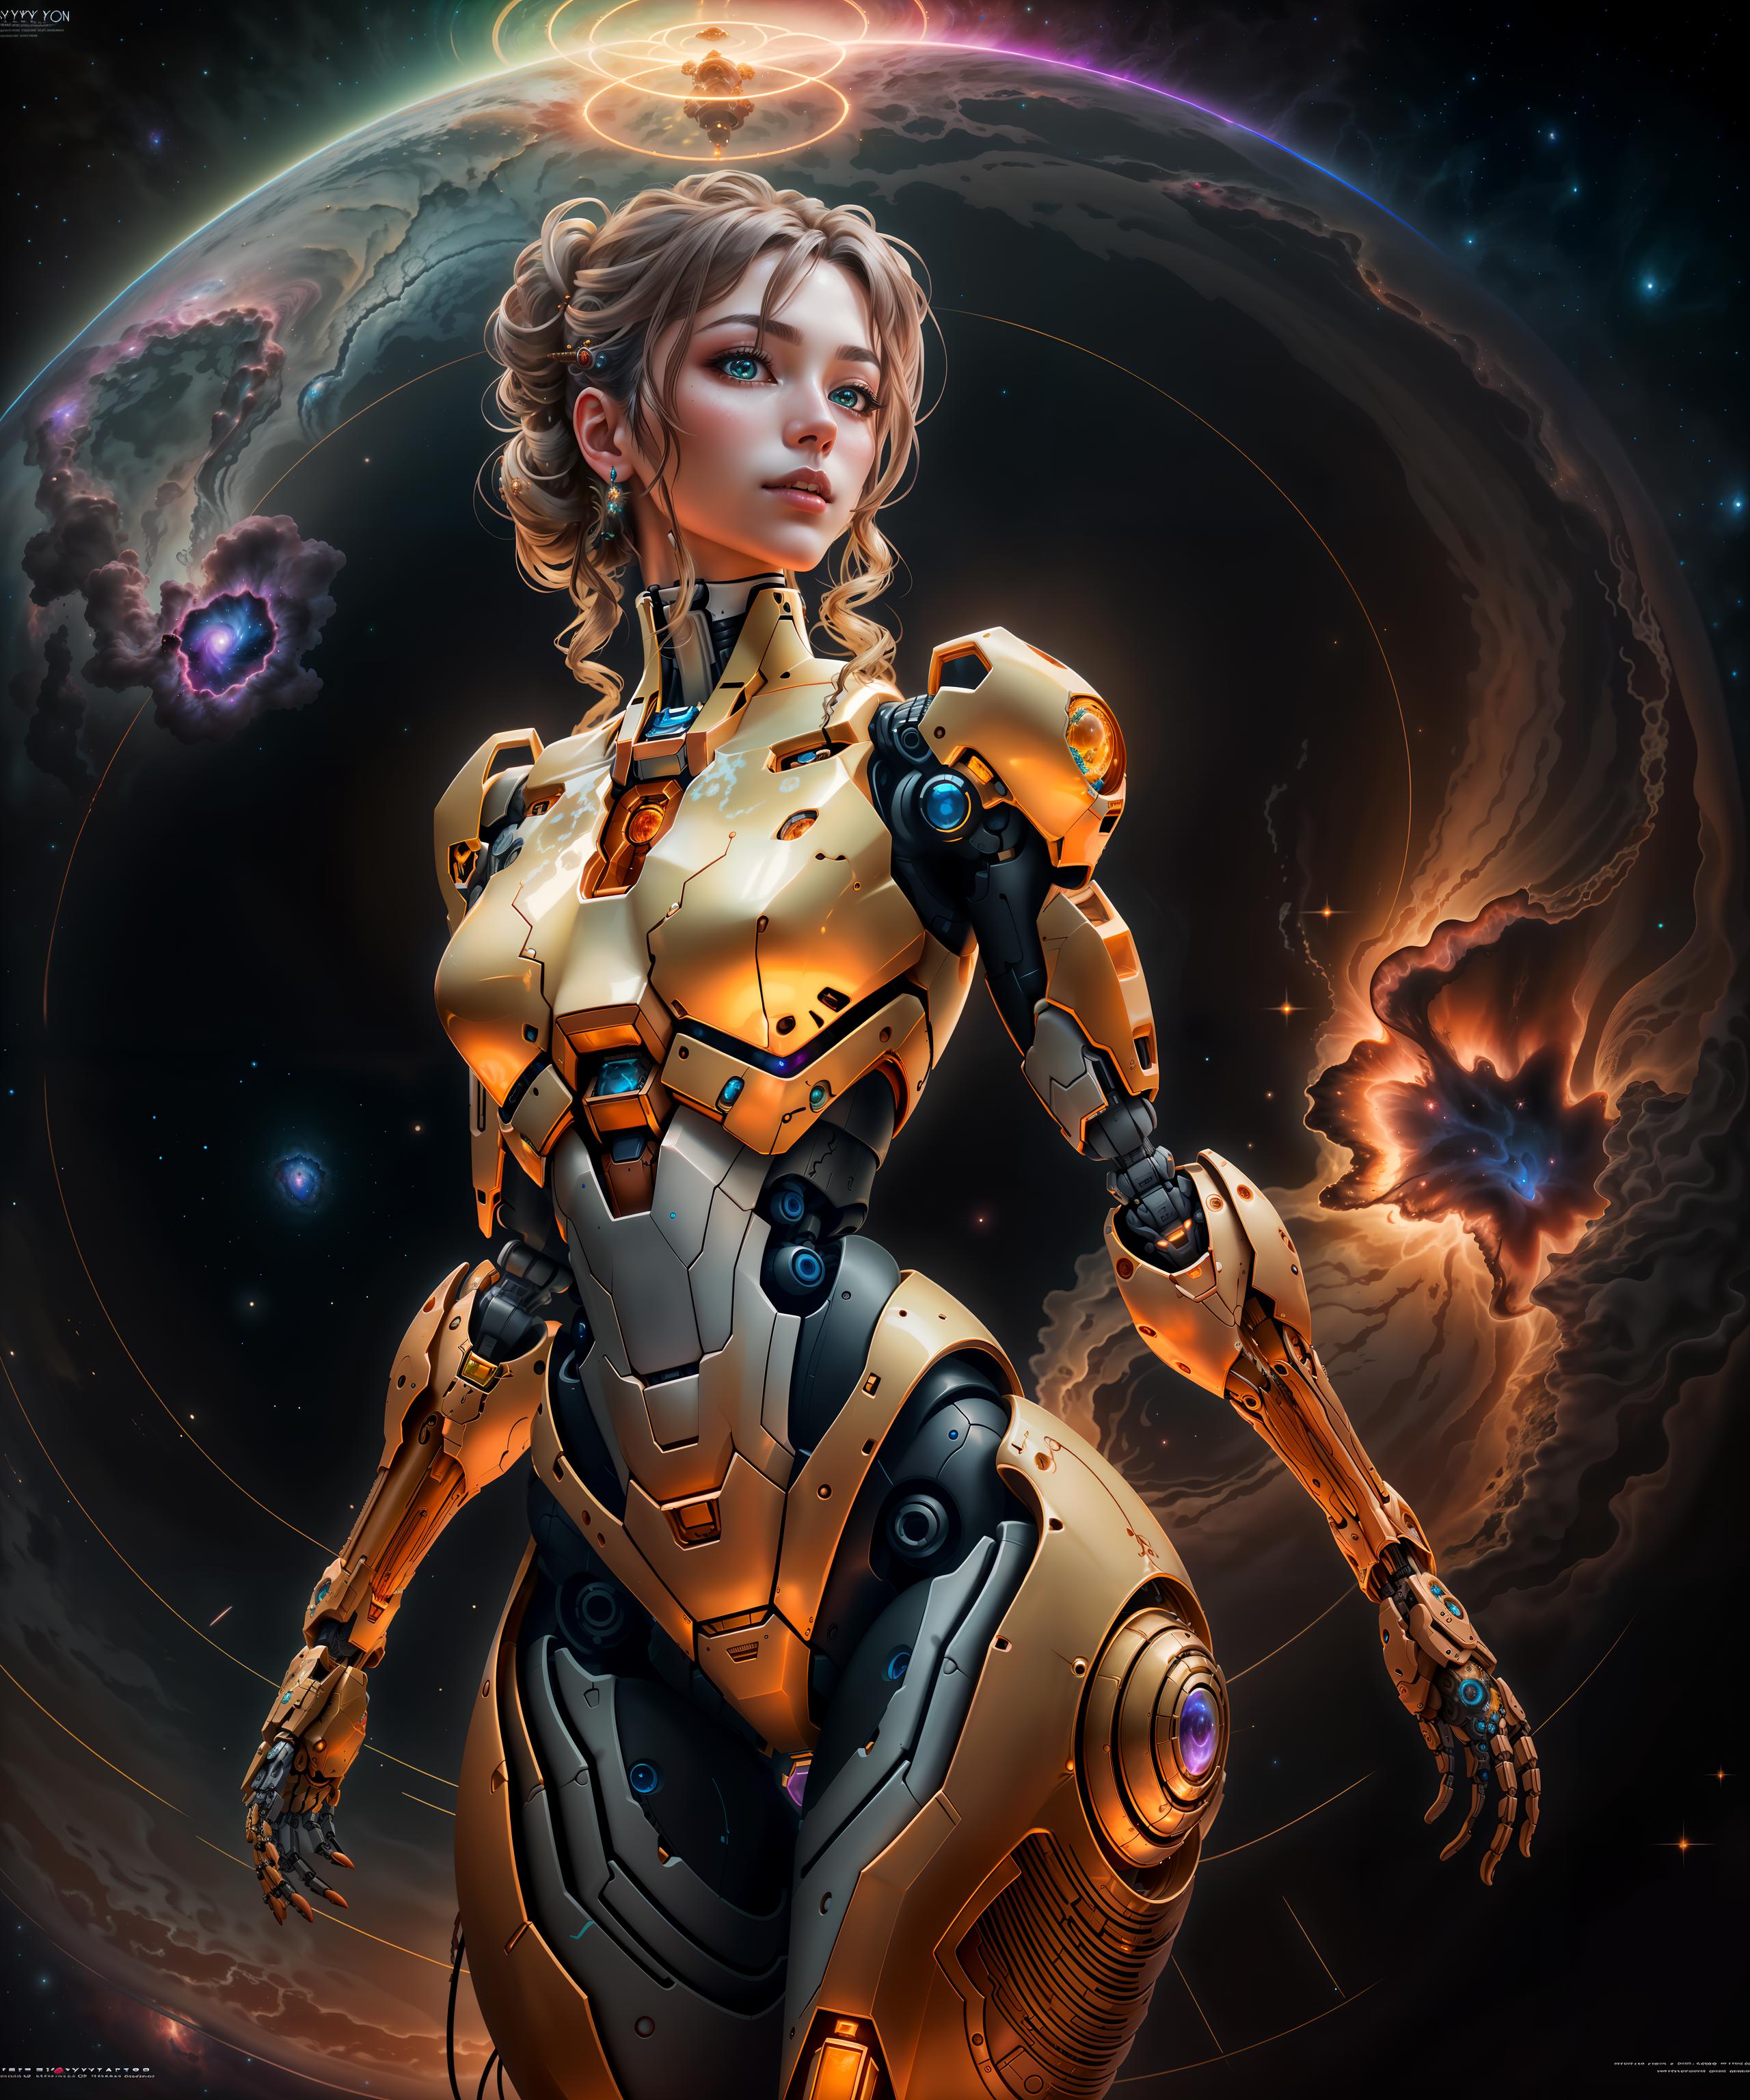 A digital illustration of a female robot or cyborg figure with a prominent ponytail, wearing an armored outfit. The scene takes place in a space setting with a planet in the background and two celestial bodies visible. The woman appears to be the main focus of the image, showcasing her unique and futuristic design.